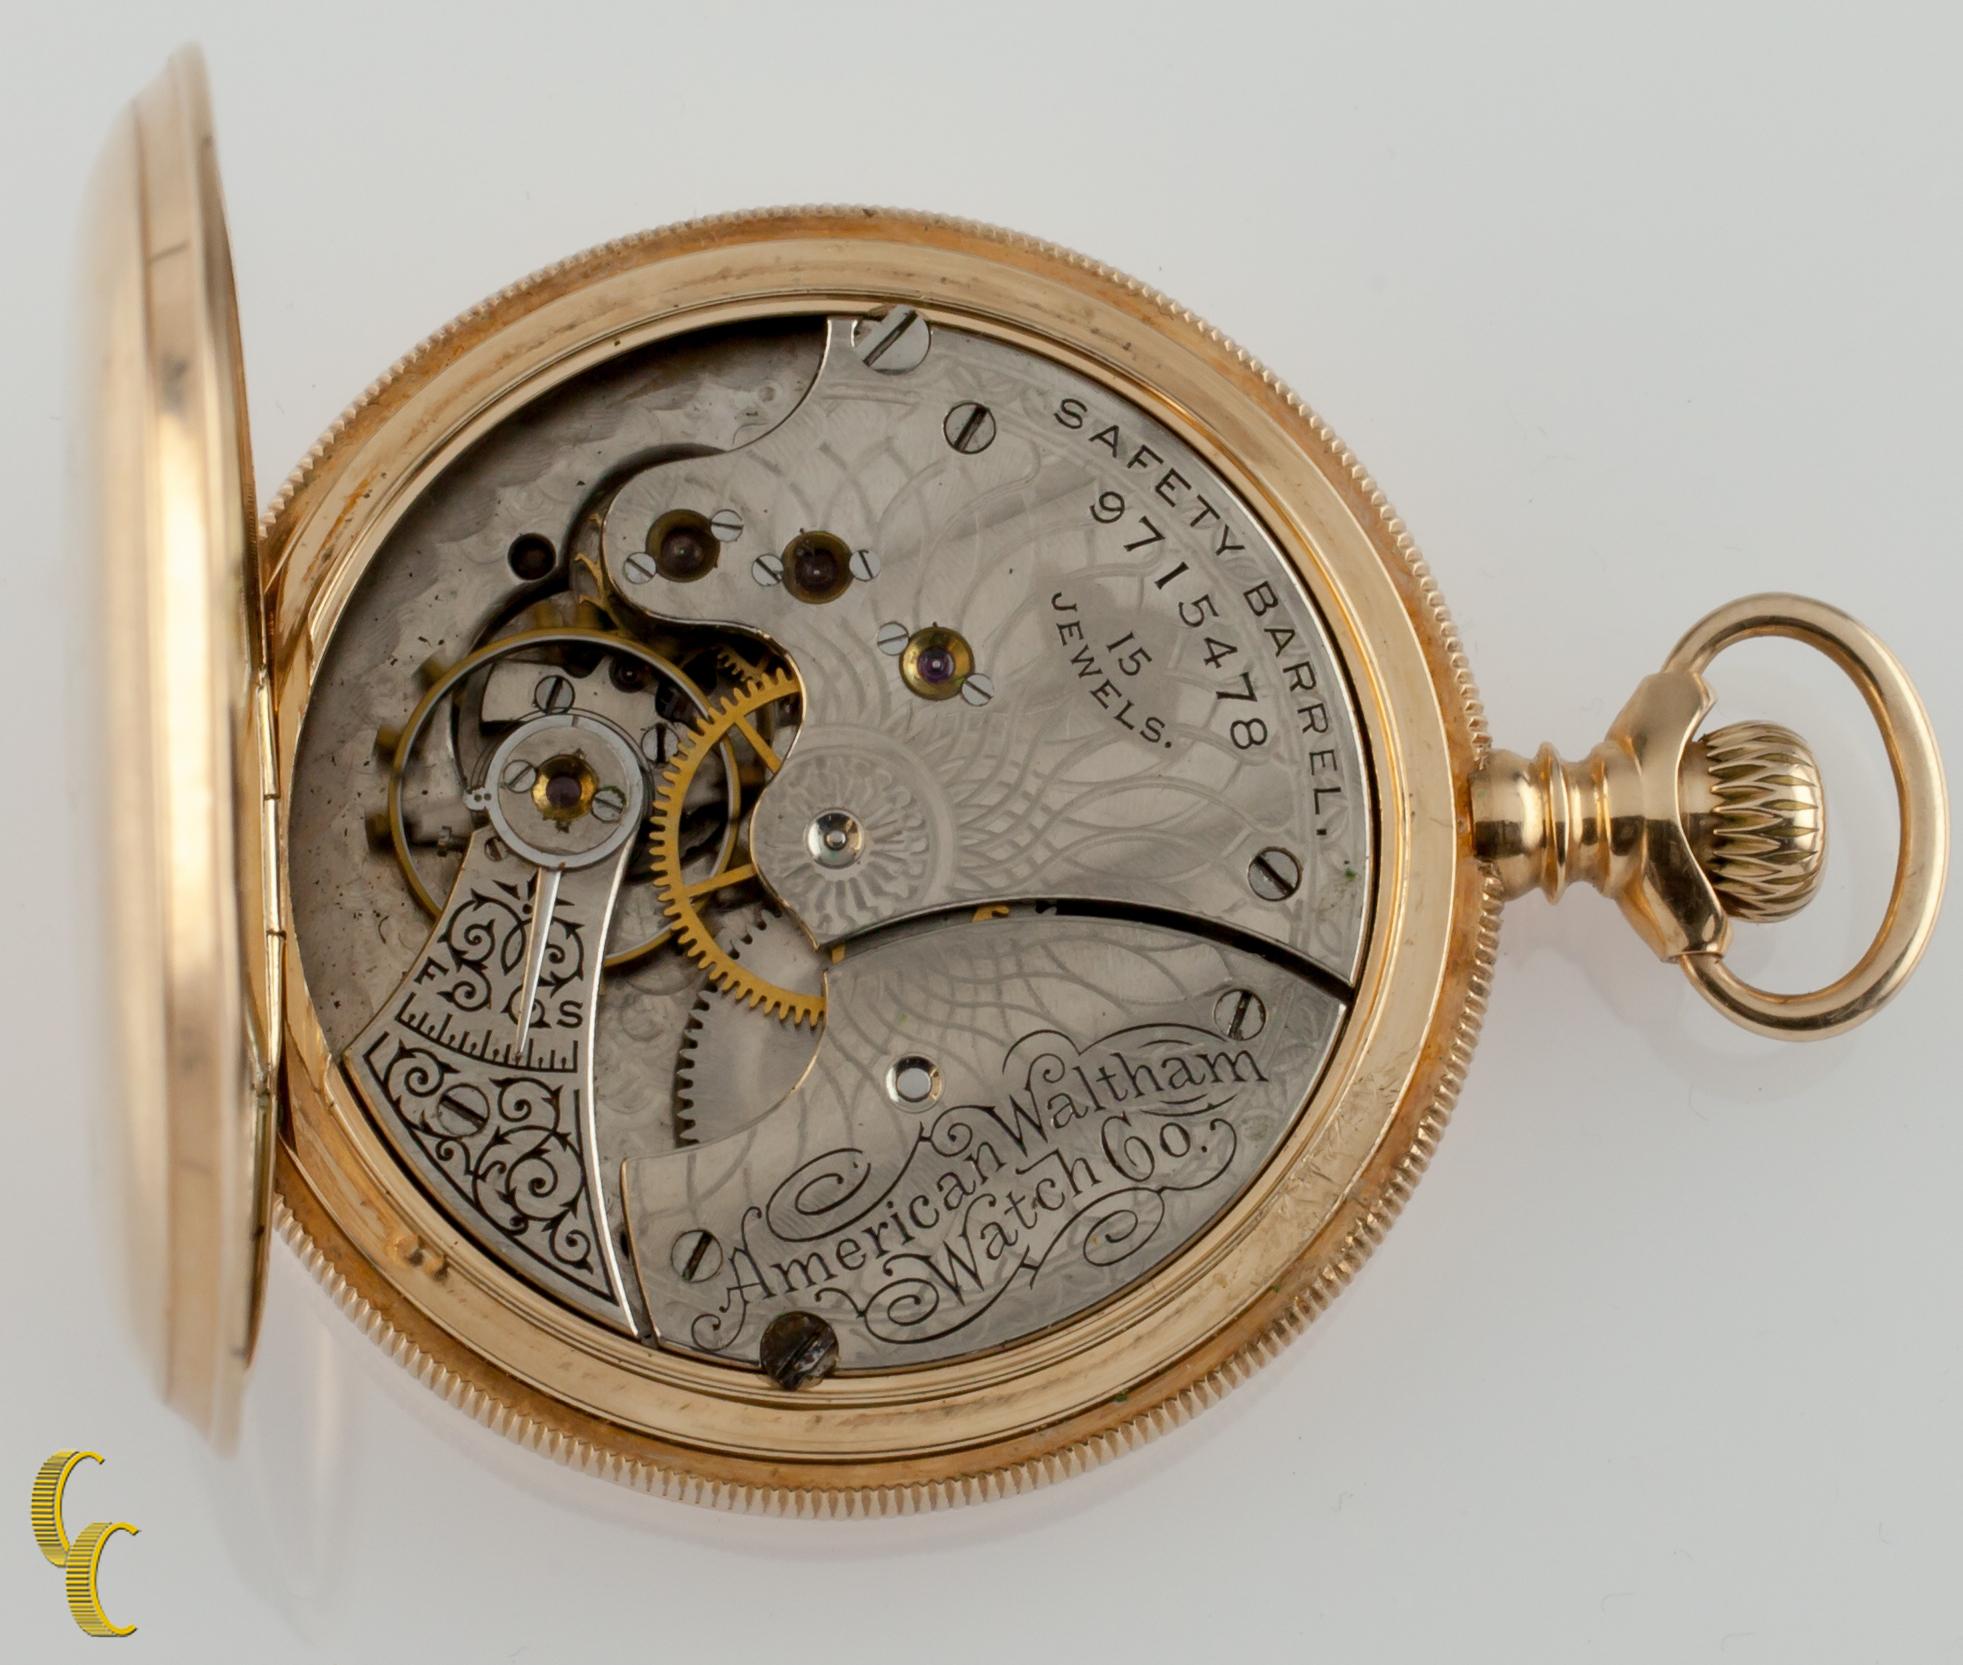 Beautiful Antique Waltham Pocket Watch w/ White Dial Including Black Hands & Dedicated Second Dial
14k Yellow Solid Gold Case w/ Intricate Hand-Etched Design with Monogram on Front of Case
Black Roman Numerals
Case Serial #104882
15-Jewel Waltham